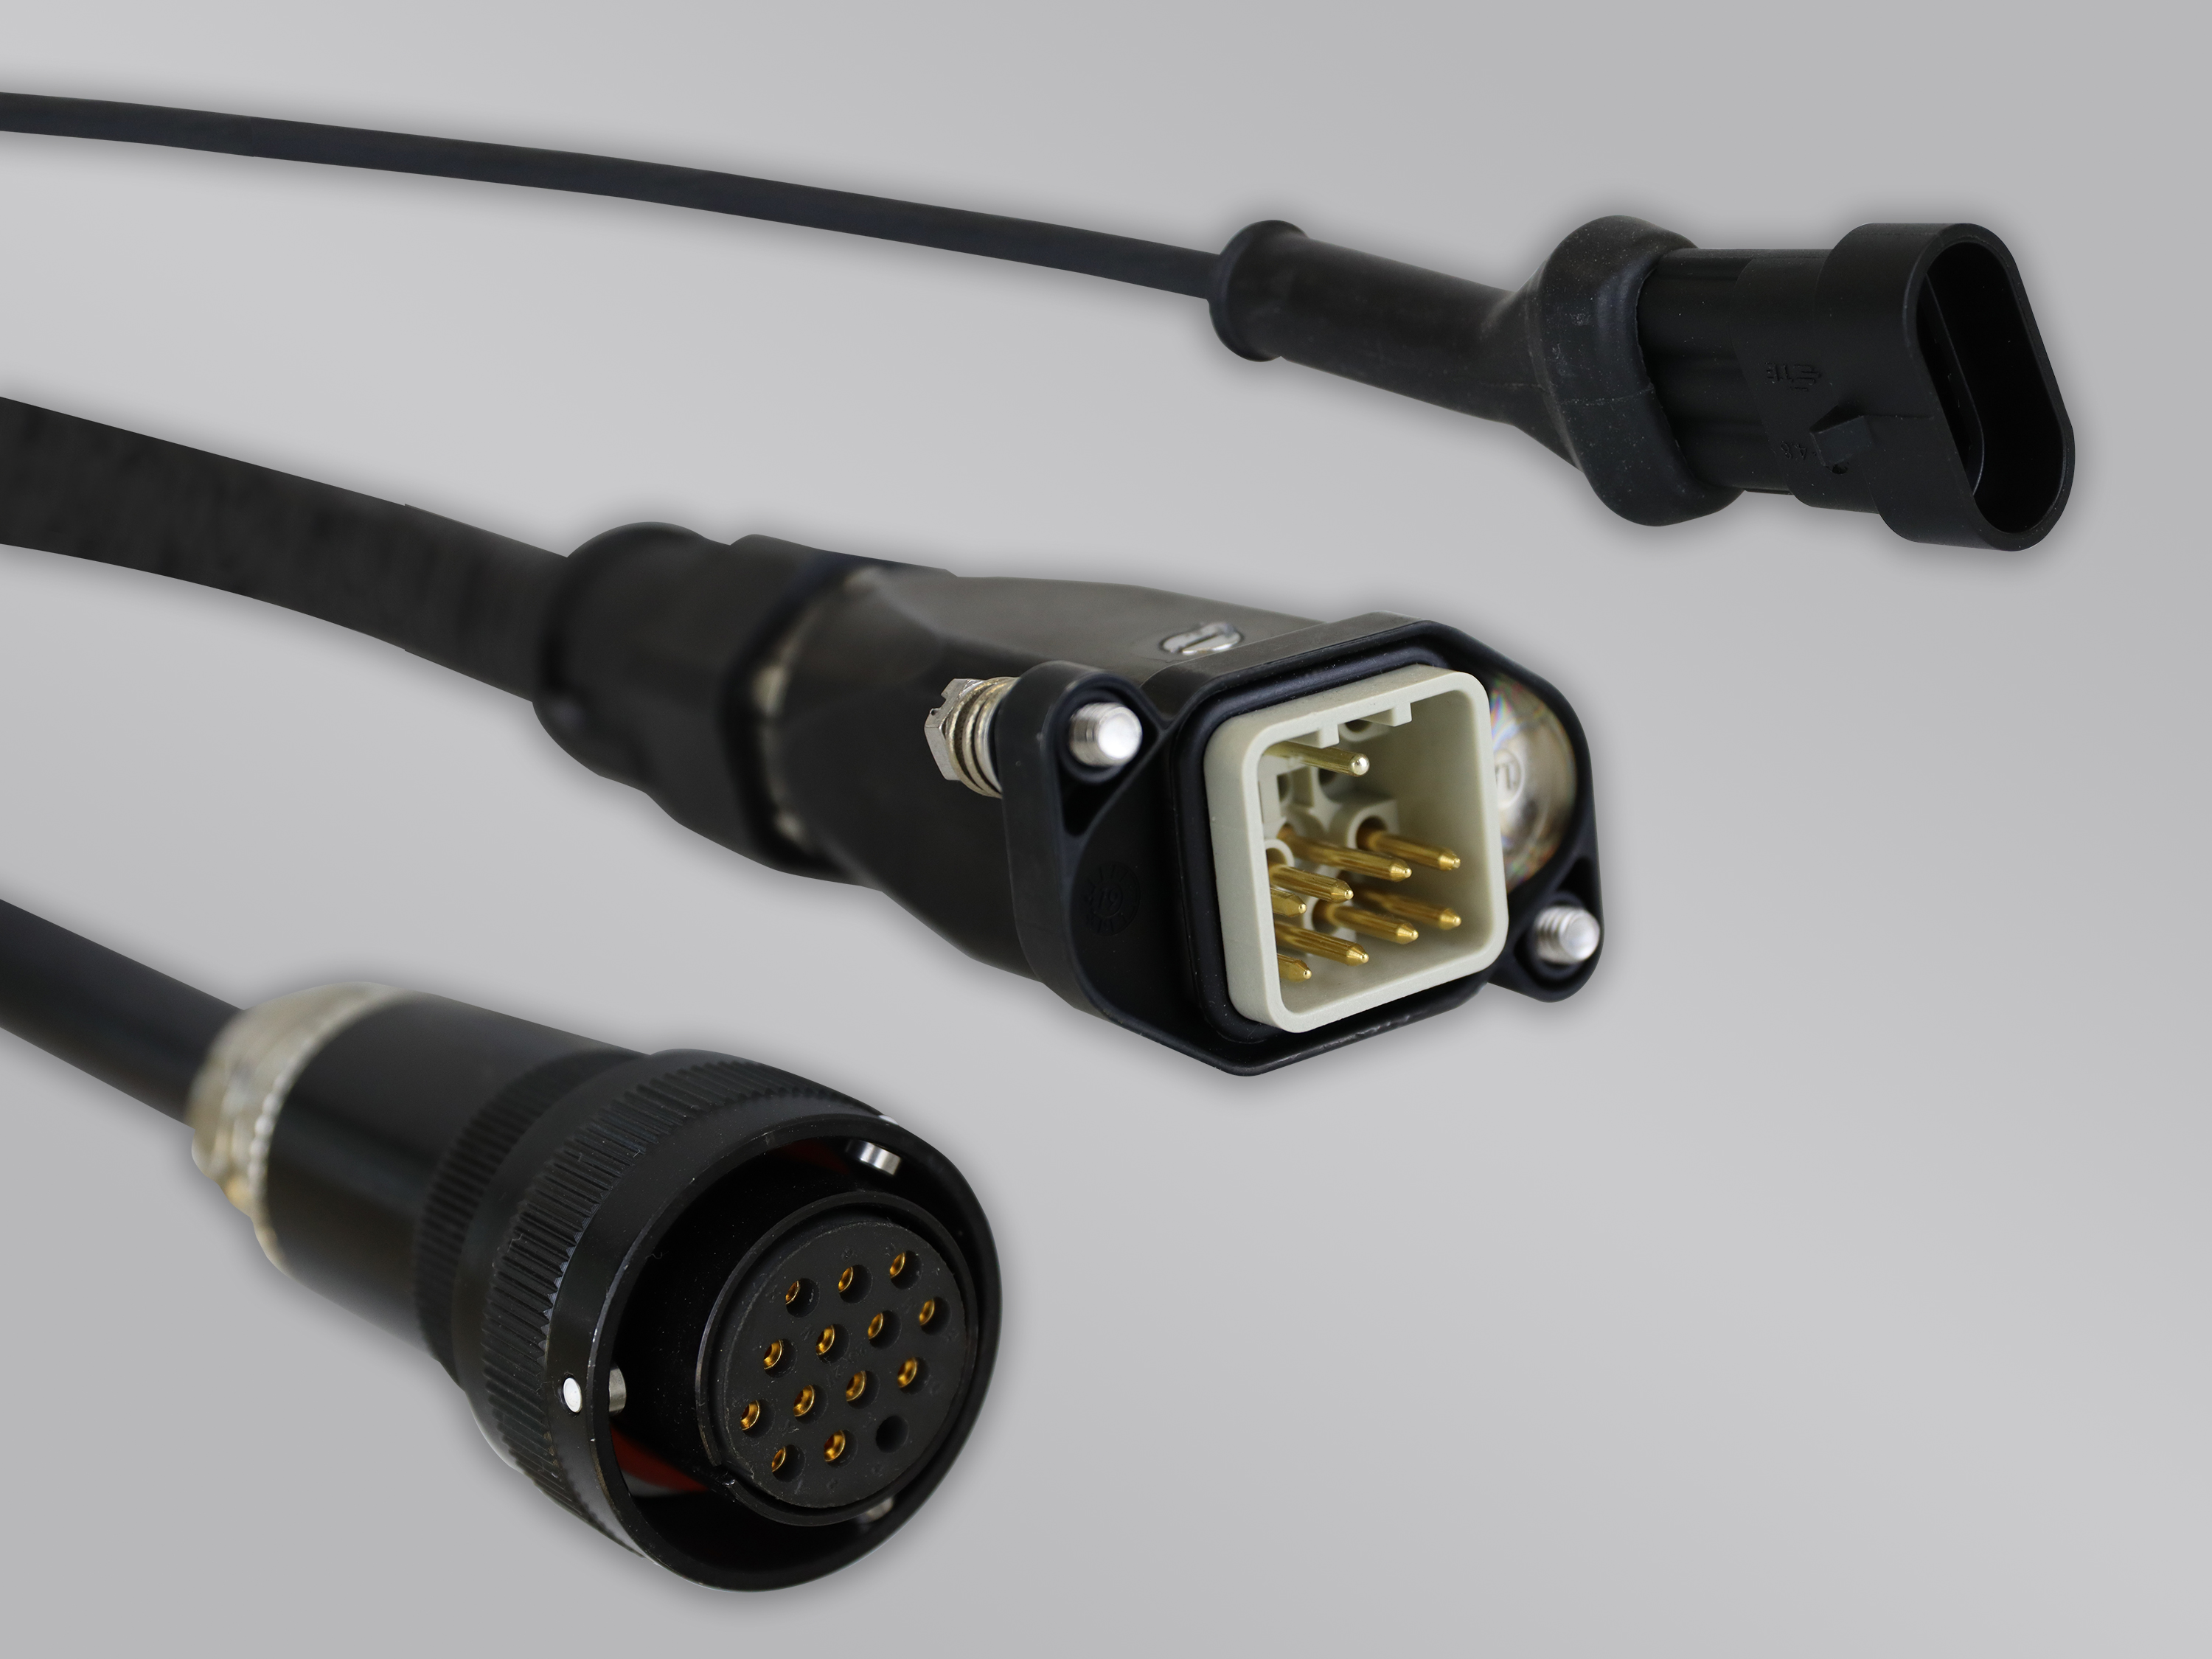 The image shows three different connector plugs on a grey background